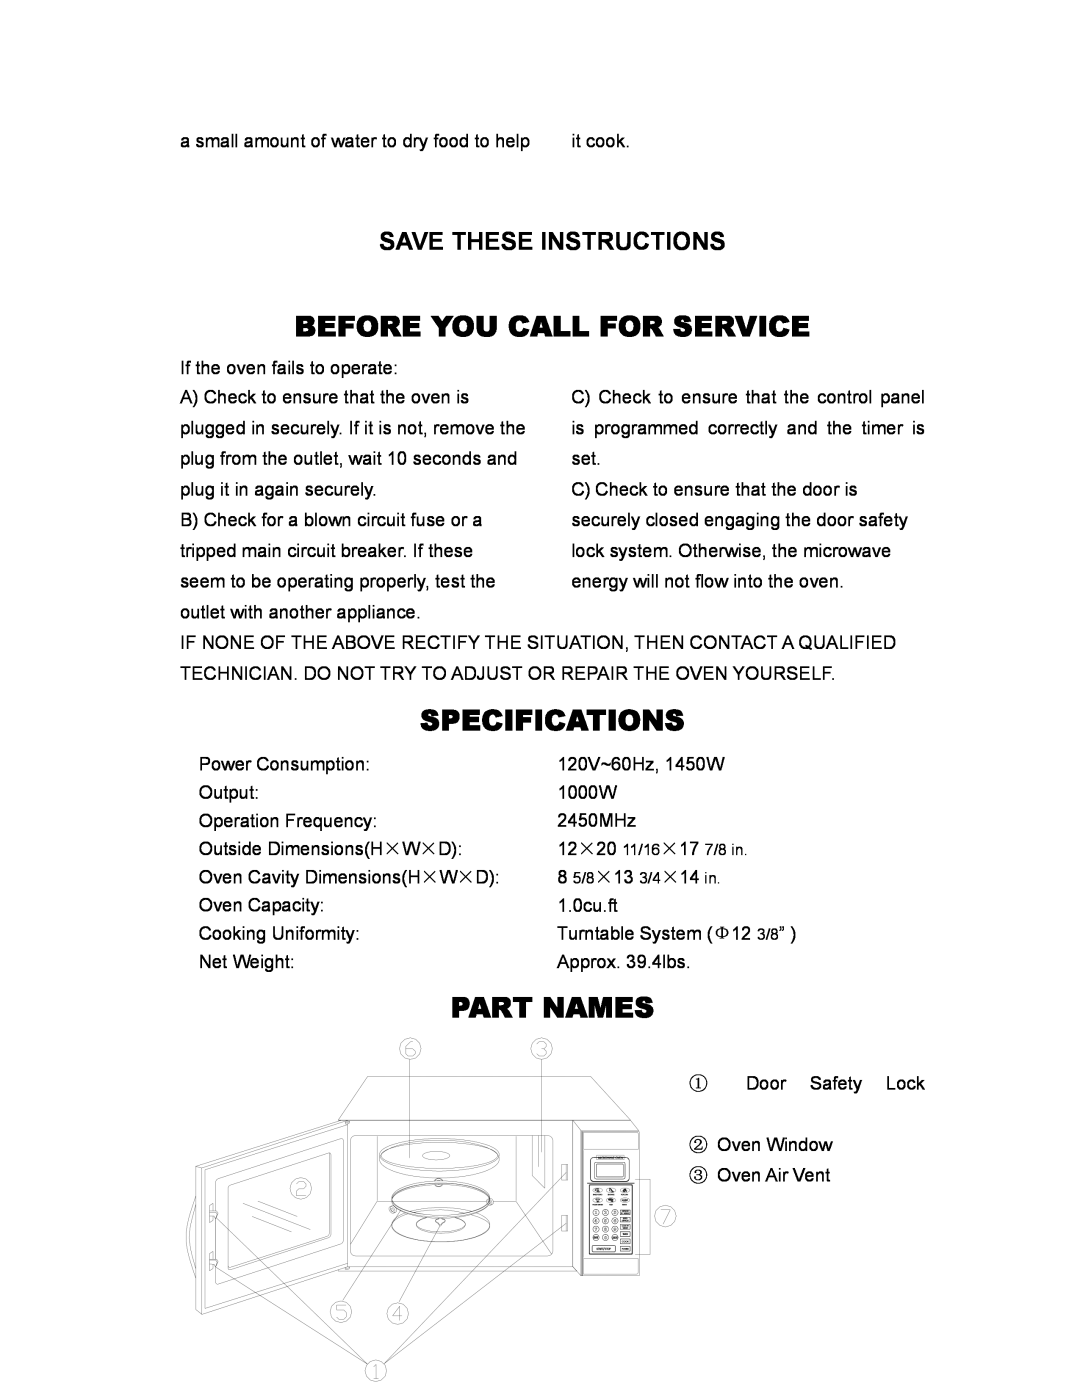 Sunbeam SMW978 owner manual Before You Call For Service, Specifications, Part Names, Save These Instructions 